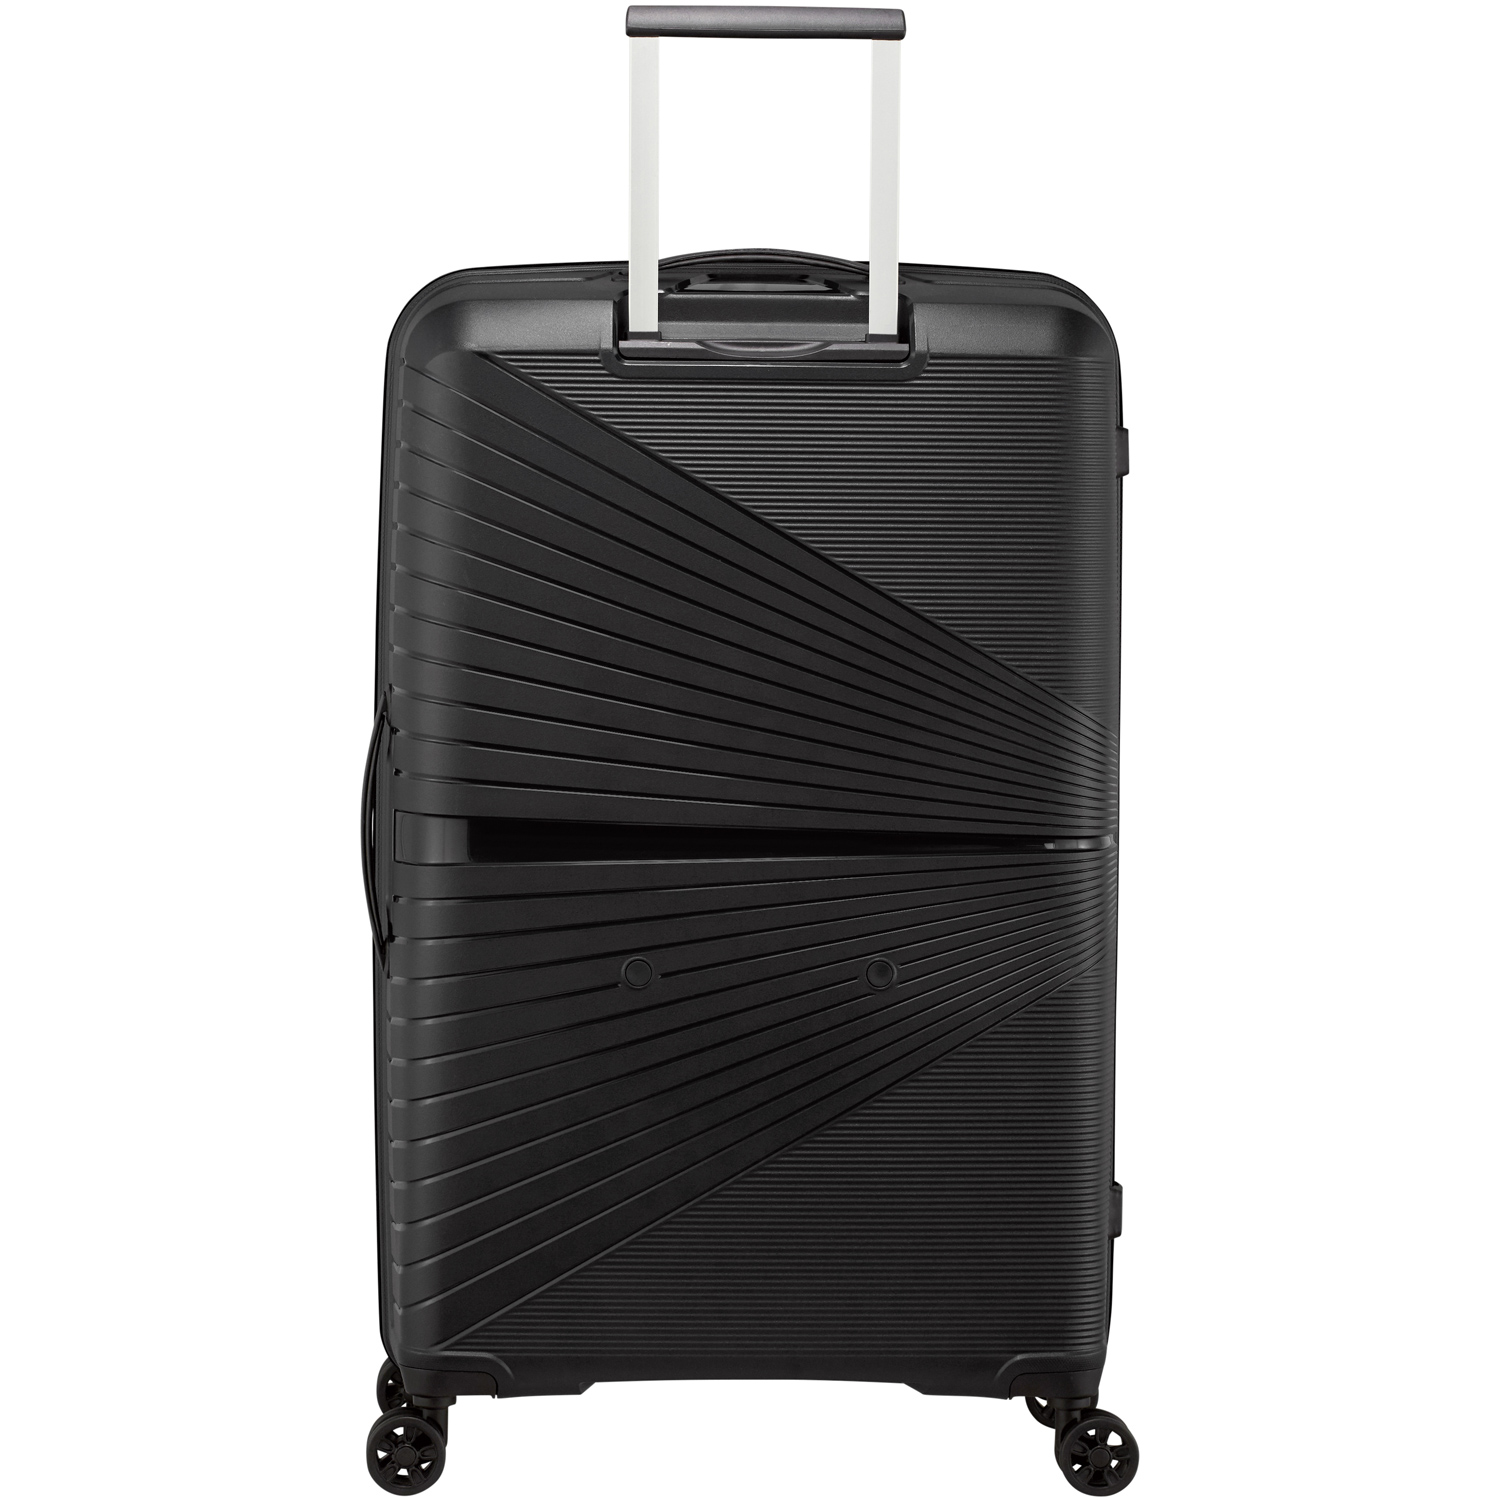 American Tourister Koffer mit 4 Rollen 77cm Airconic onyx black